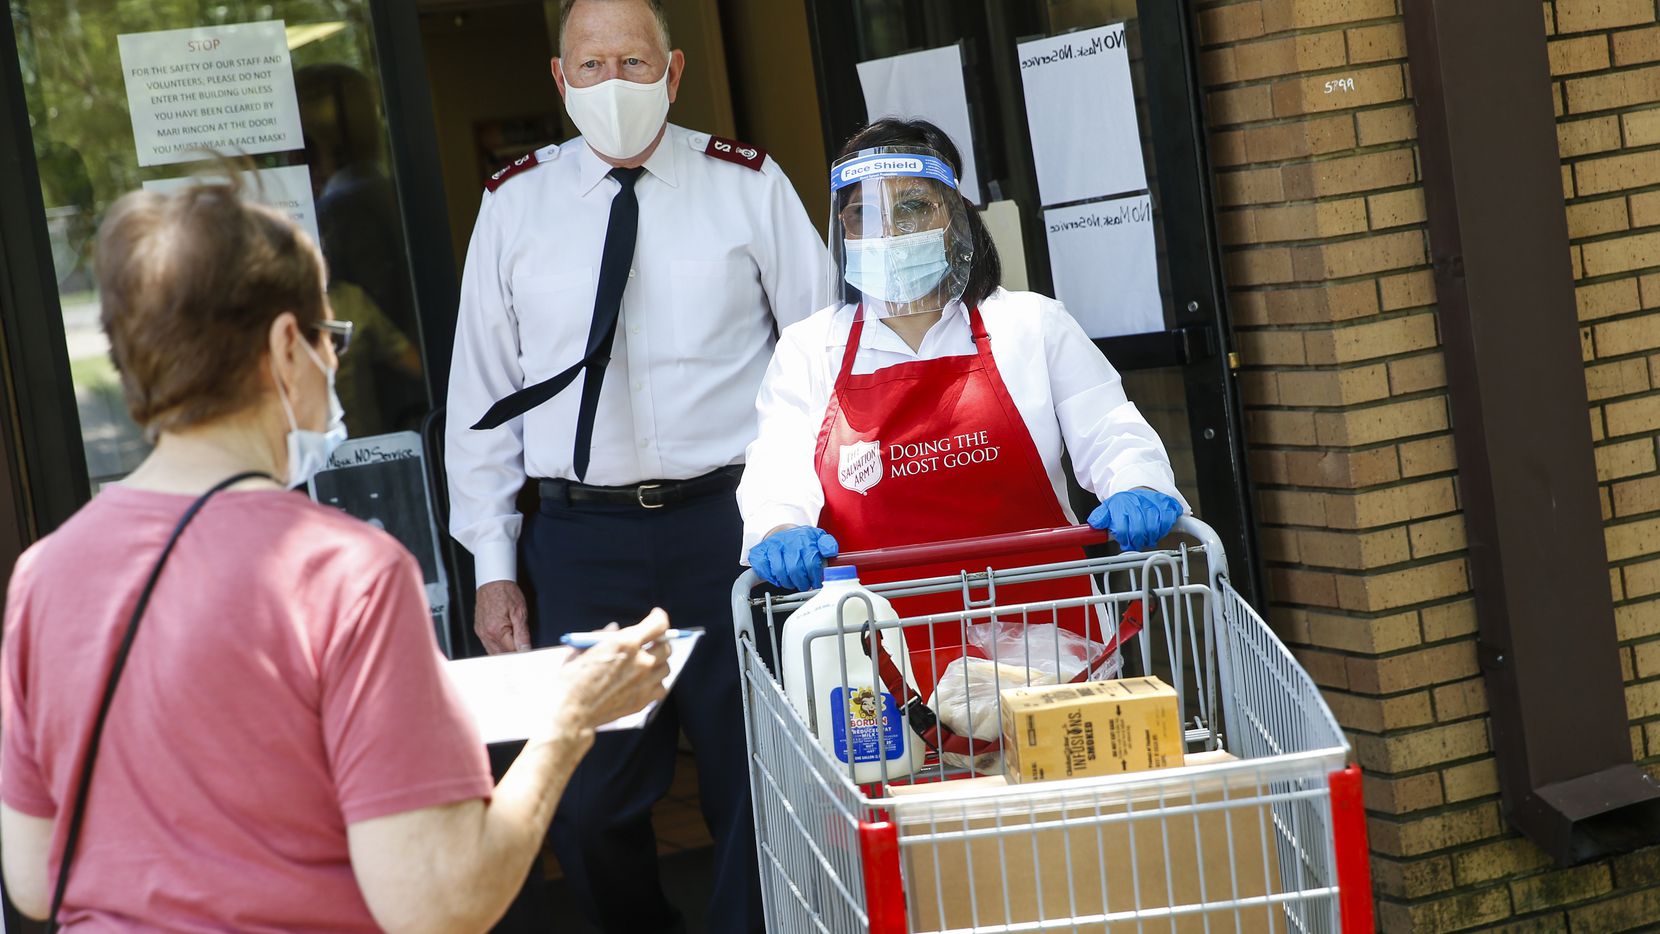 Salvation Army Major Todd Hawks, back, assists employee Maria Rincon, center, with a food...